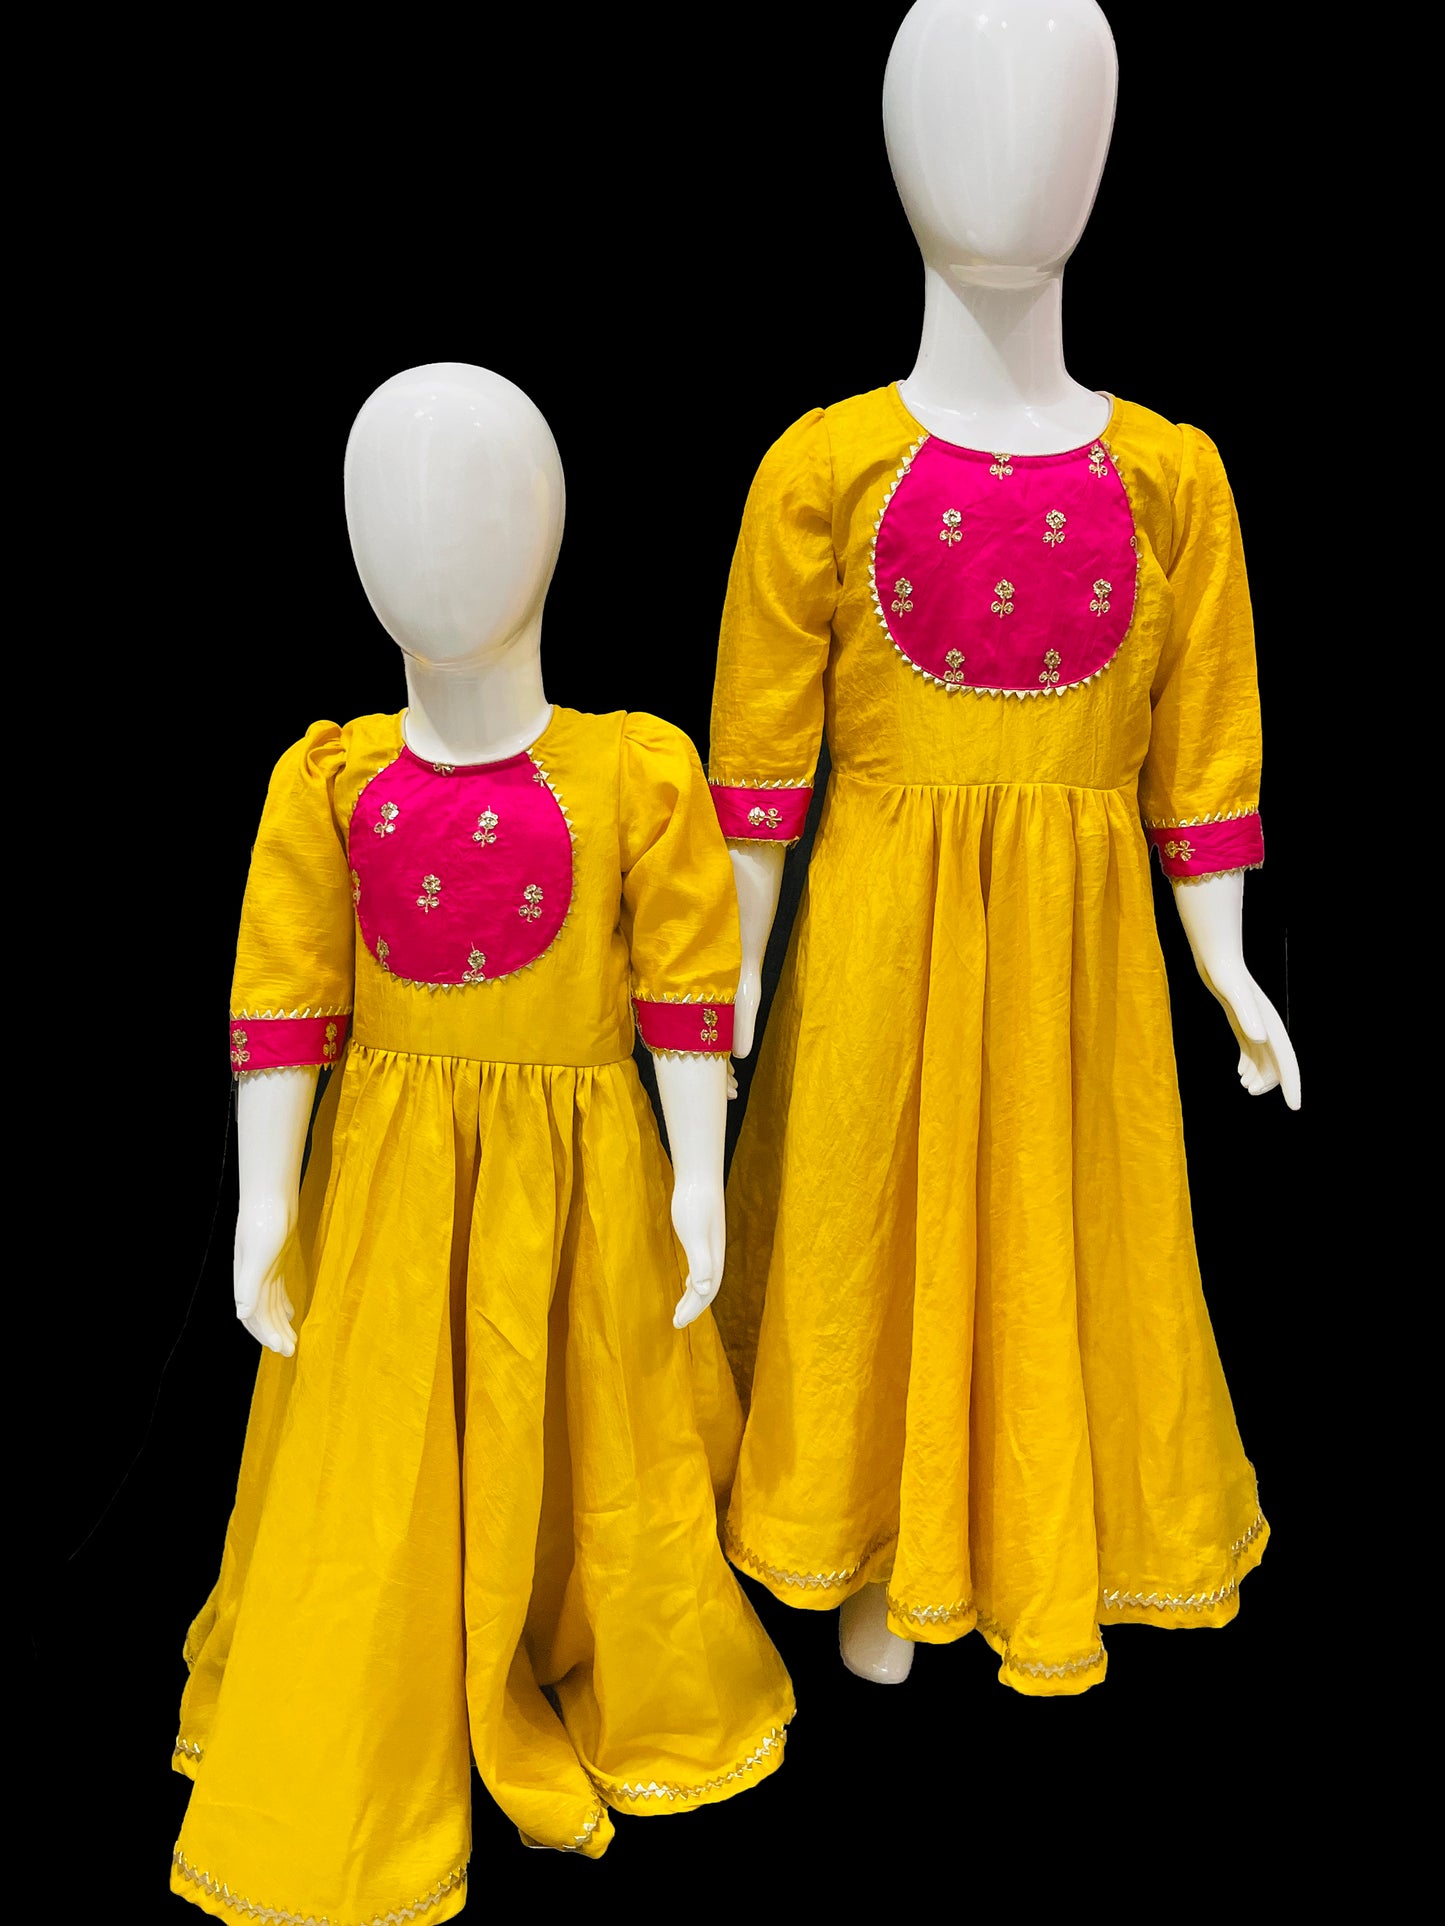 Yellow Pink Rayon Indian Long Dress for Girls